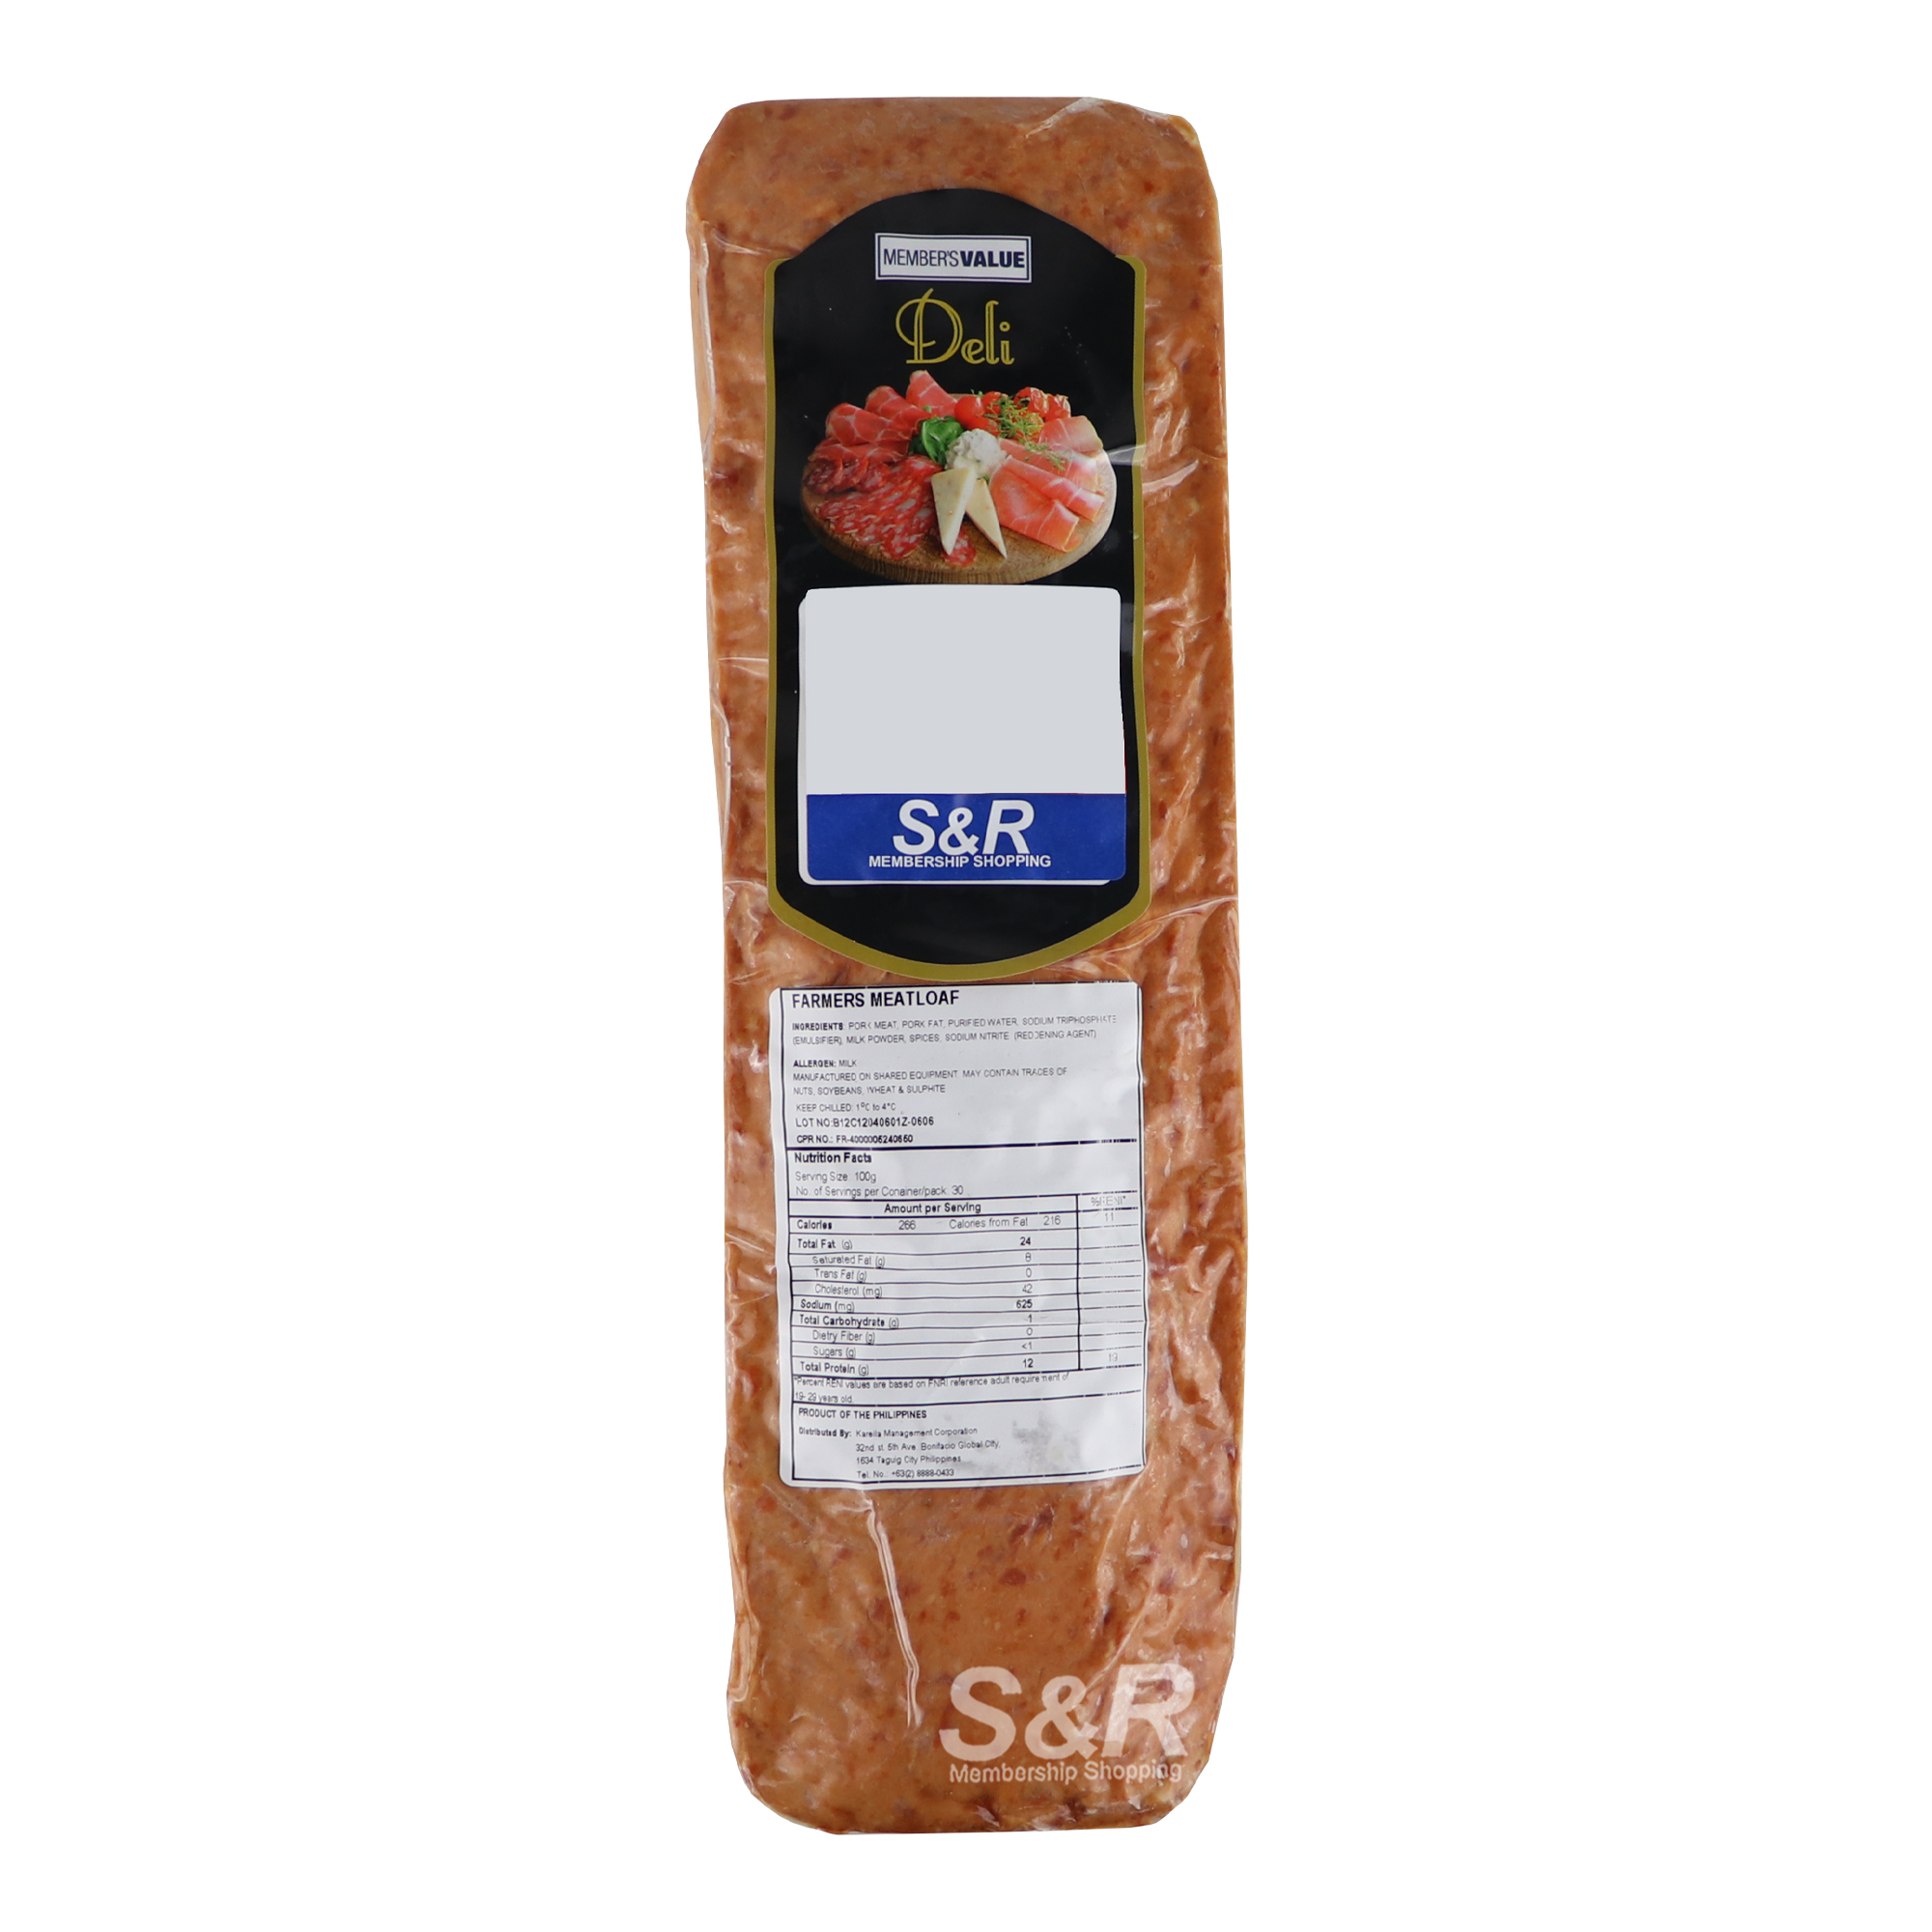 Member's Value Smoked Farmer's Meatloaf approx. 3.5kg